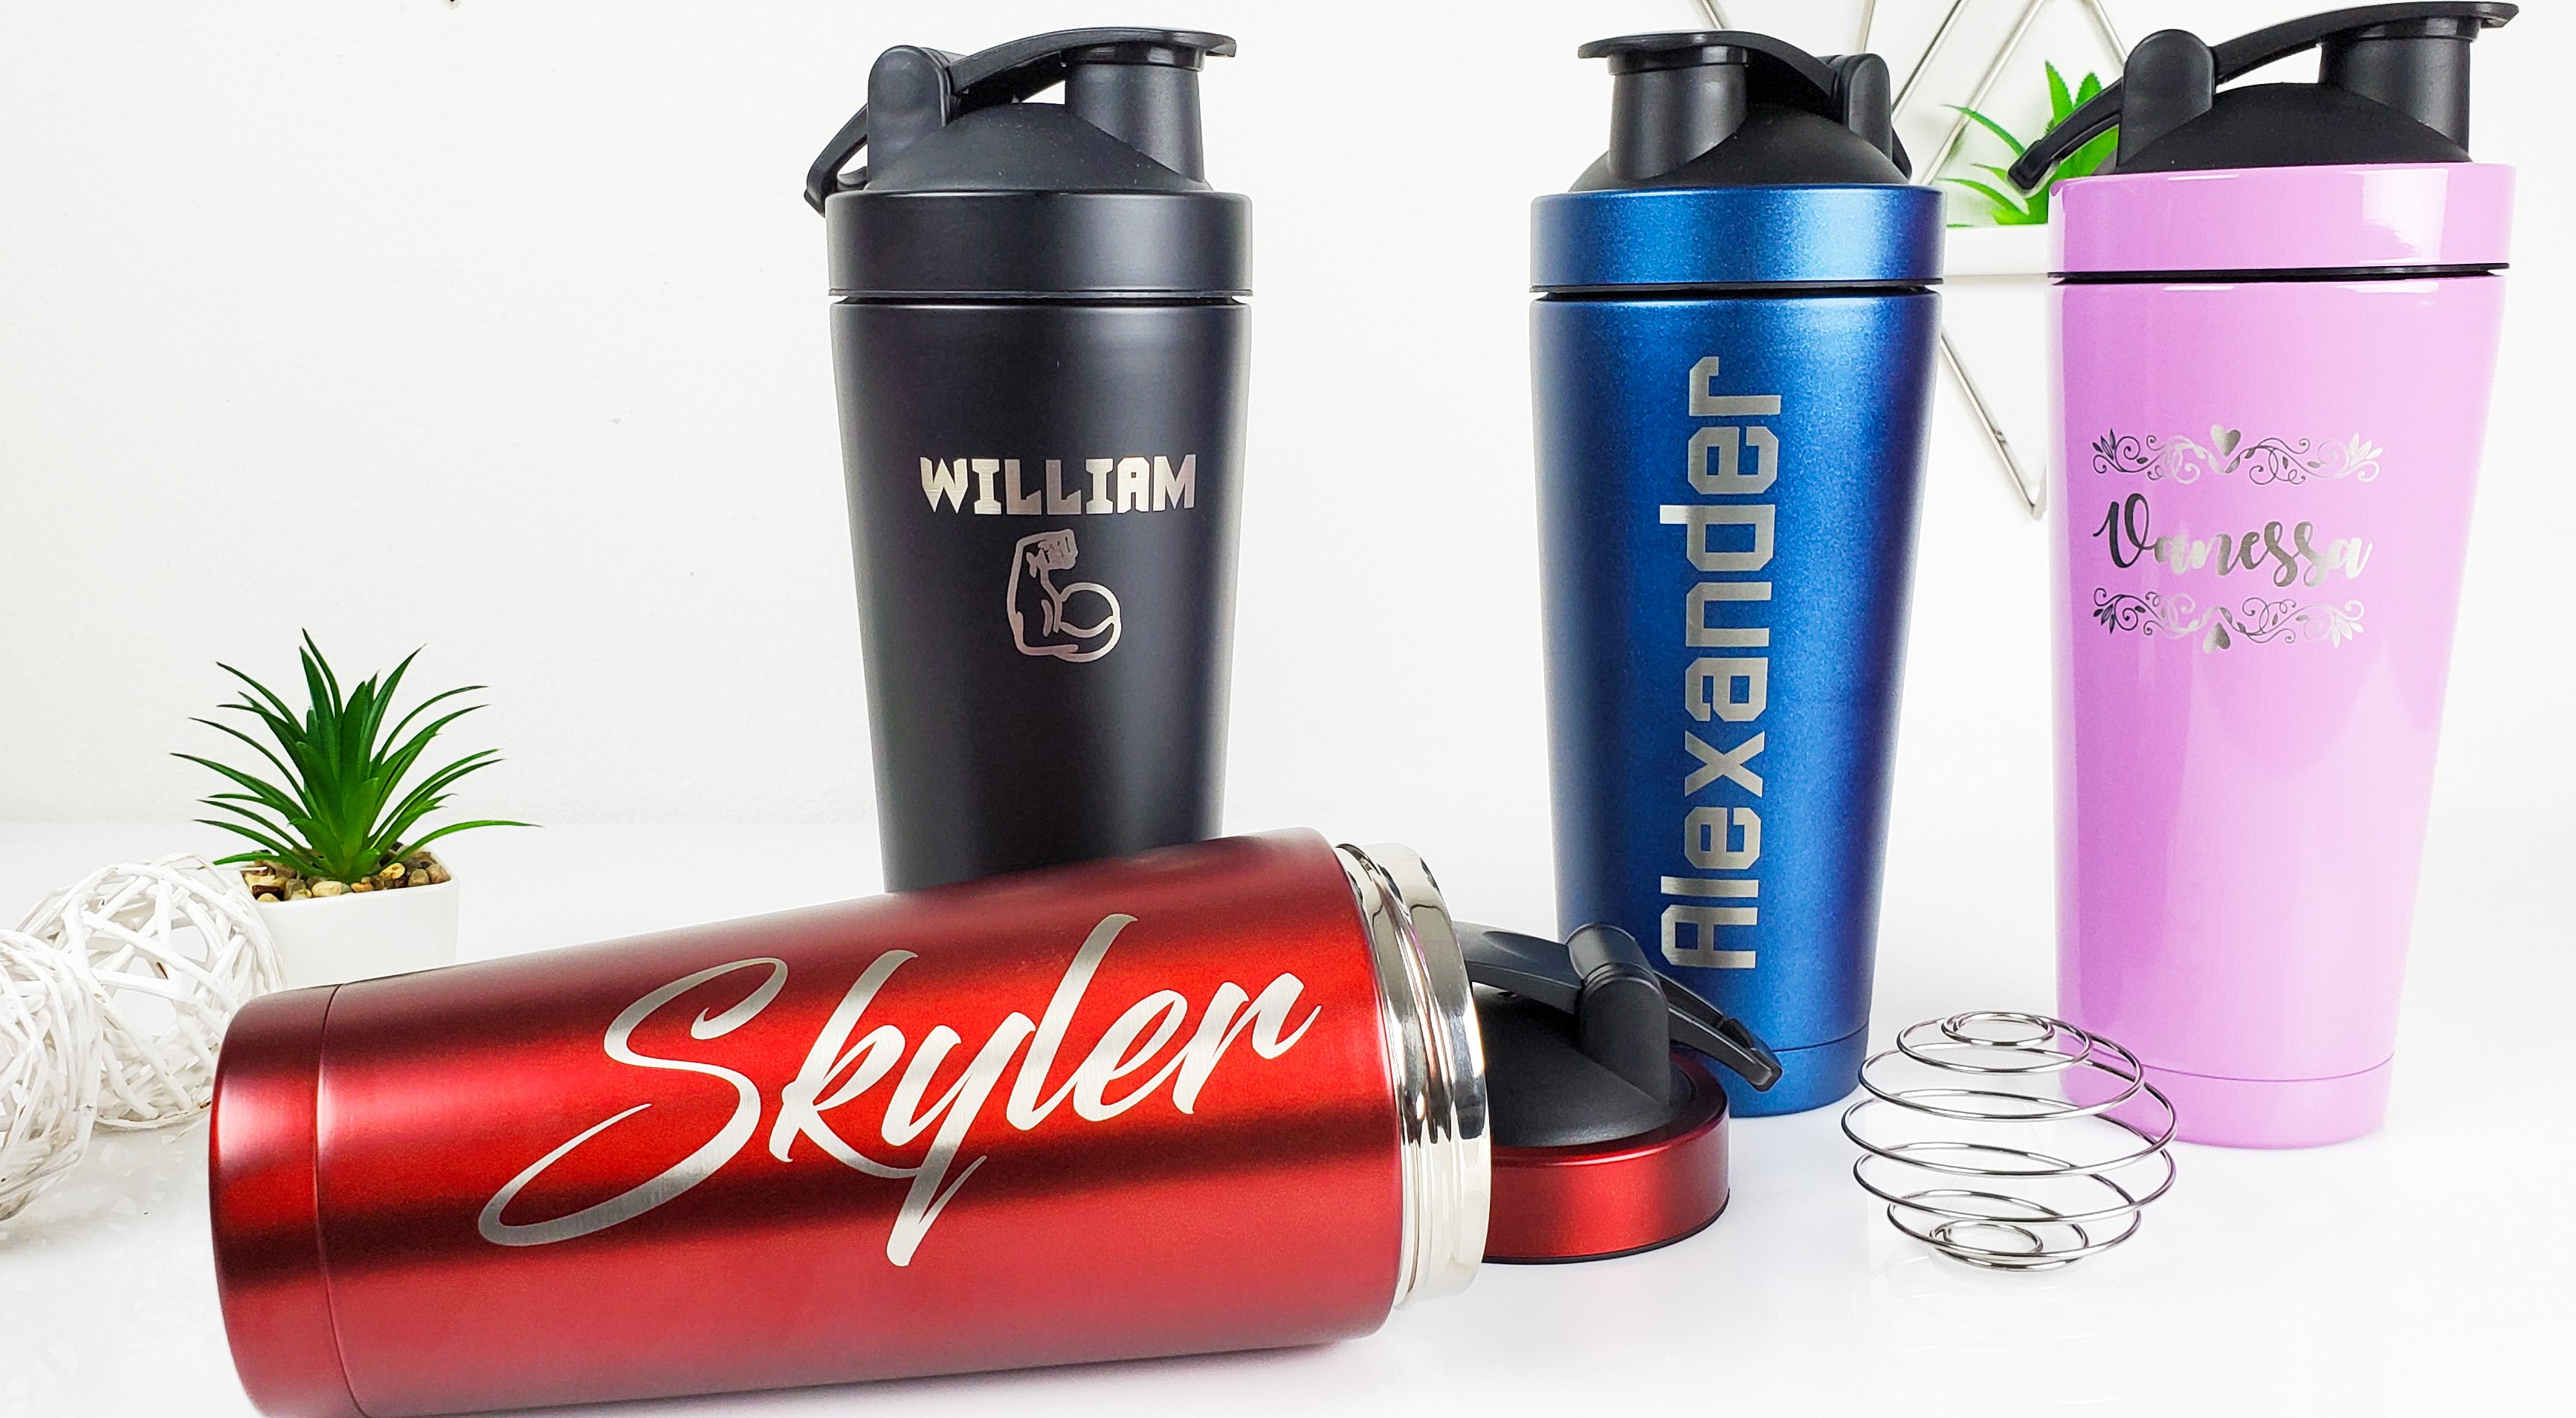 Custom Printed Stainless Steel Shaker Bottle - 30oz with your logo